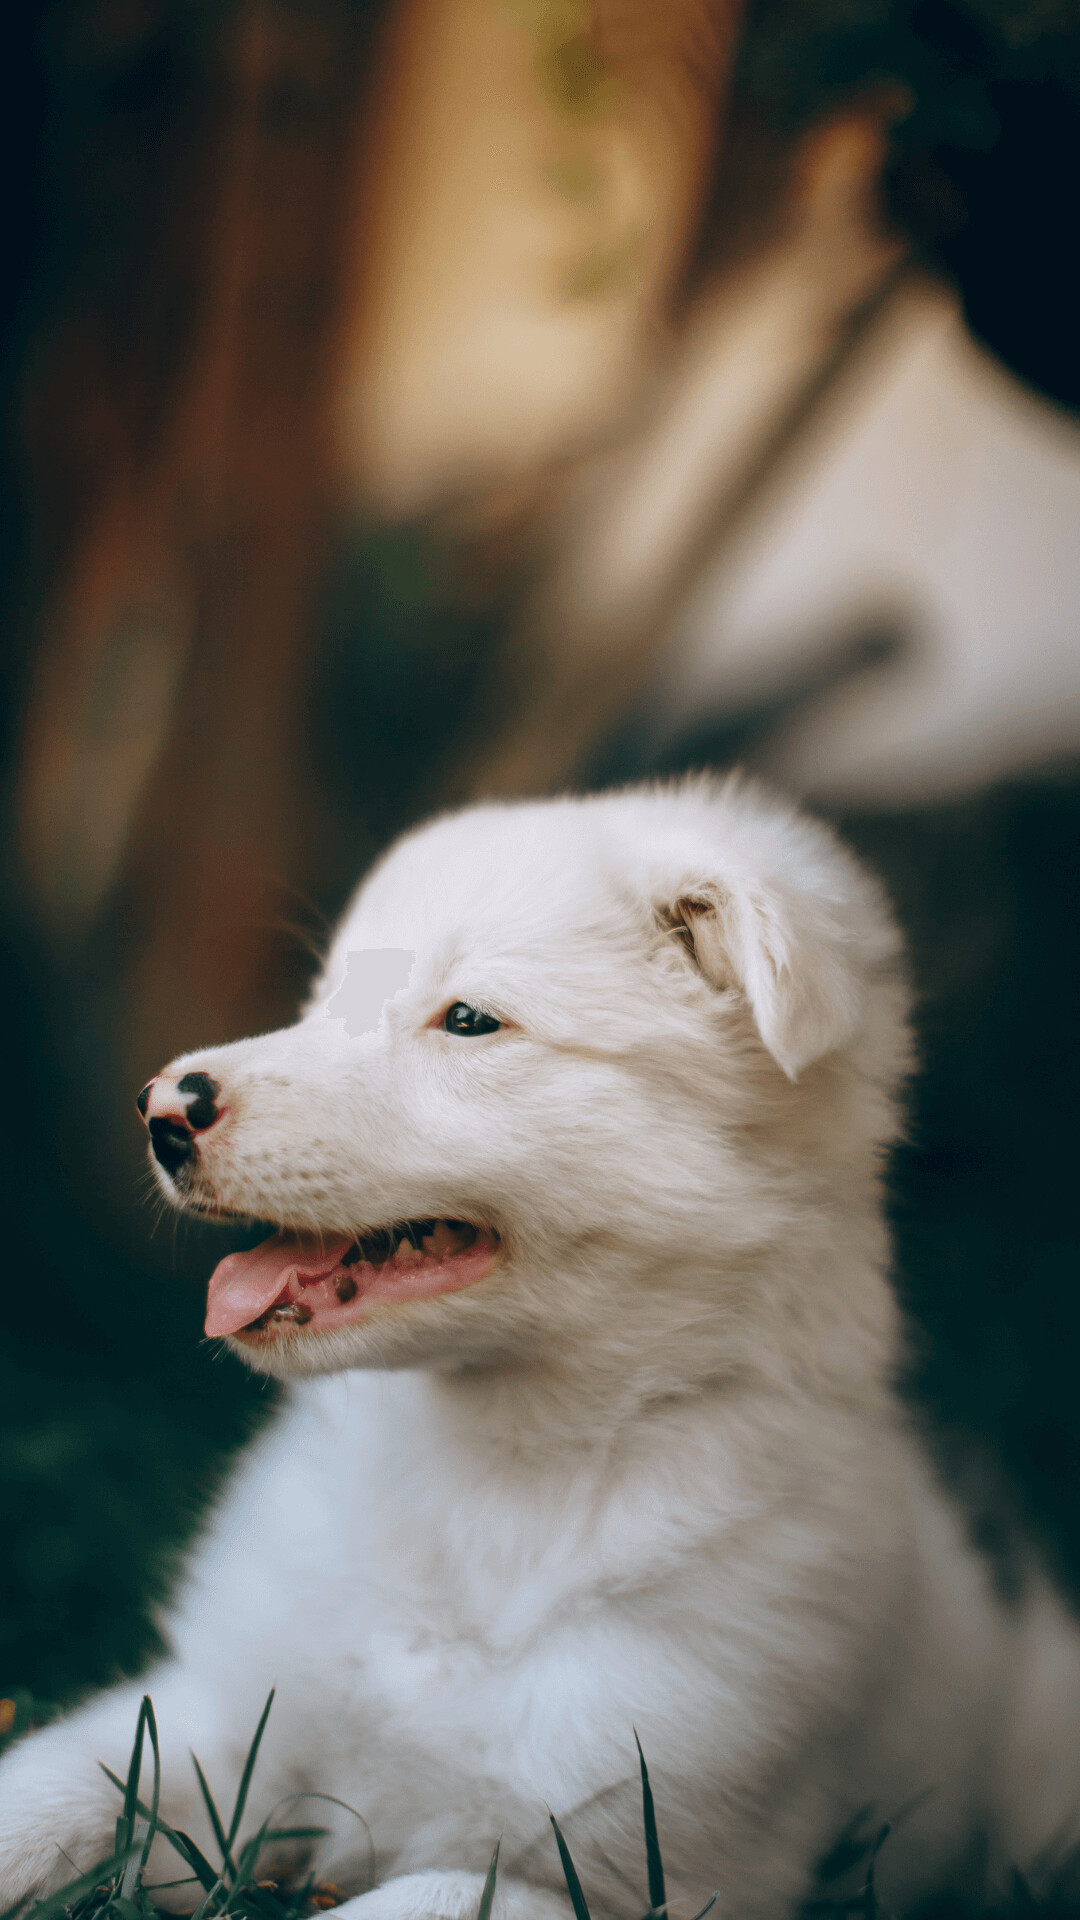 Puppy: The family Canidae, Pup. 1080x1920 Full HD Wallpaper.